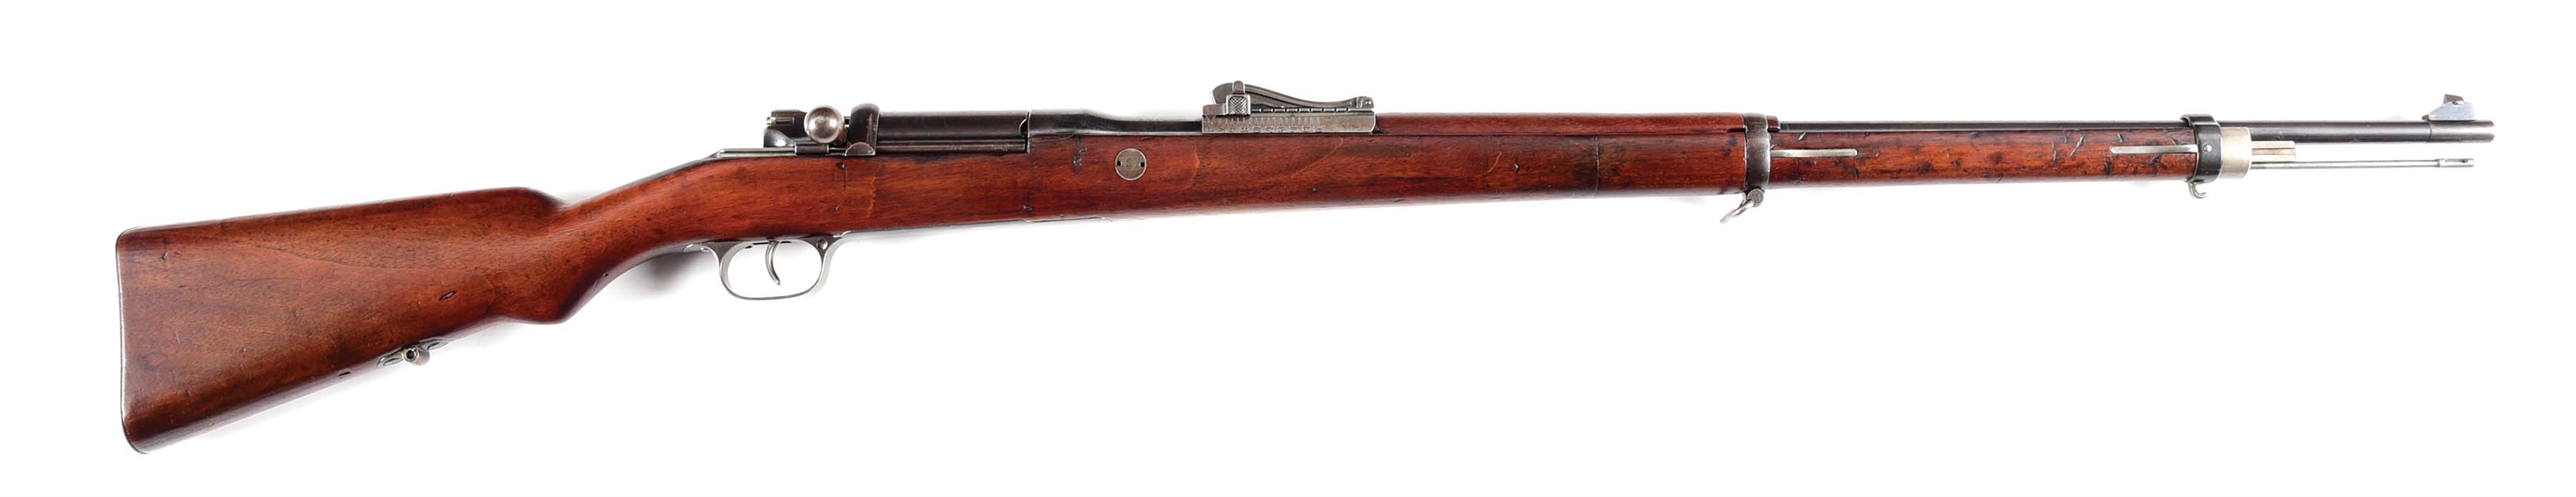 (C) EXCEEDINGLY SCARCE & HIGH CONDITION GERMAN SCHLEGELMILCH M1896 EXPERIMENTAL BOLT ACTION RIFLE.